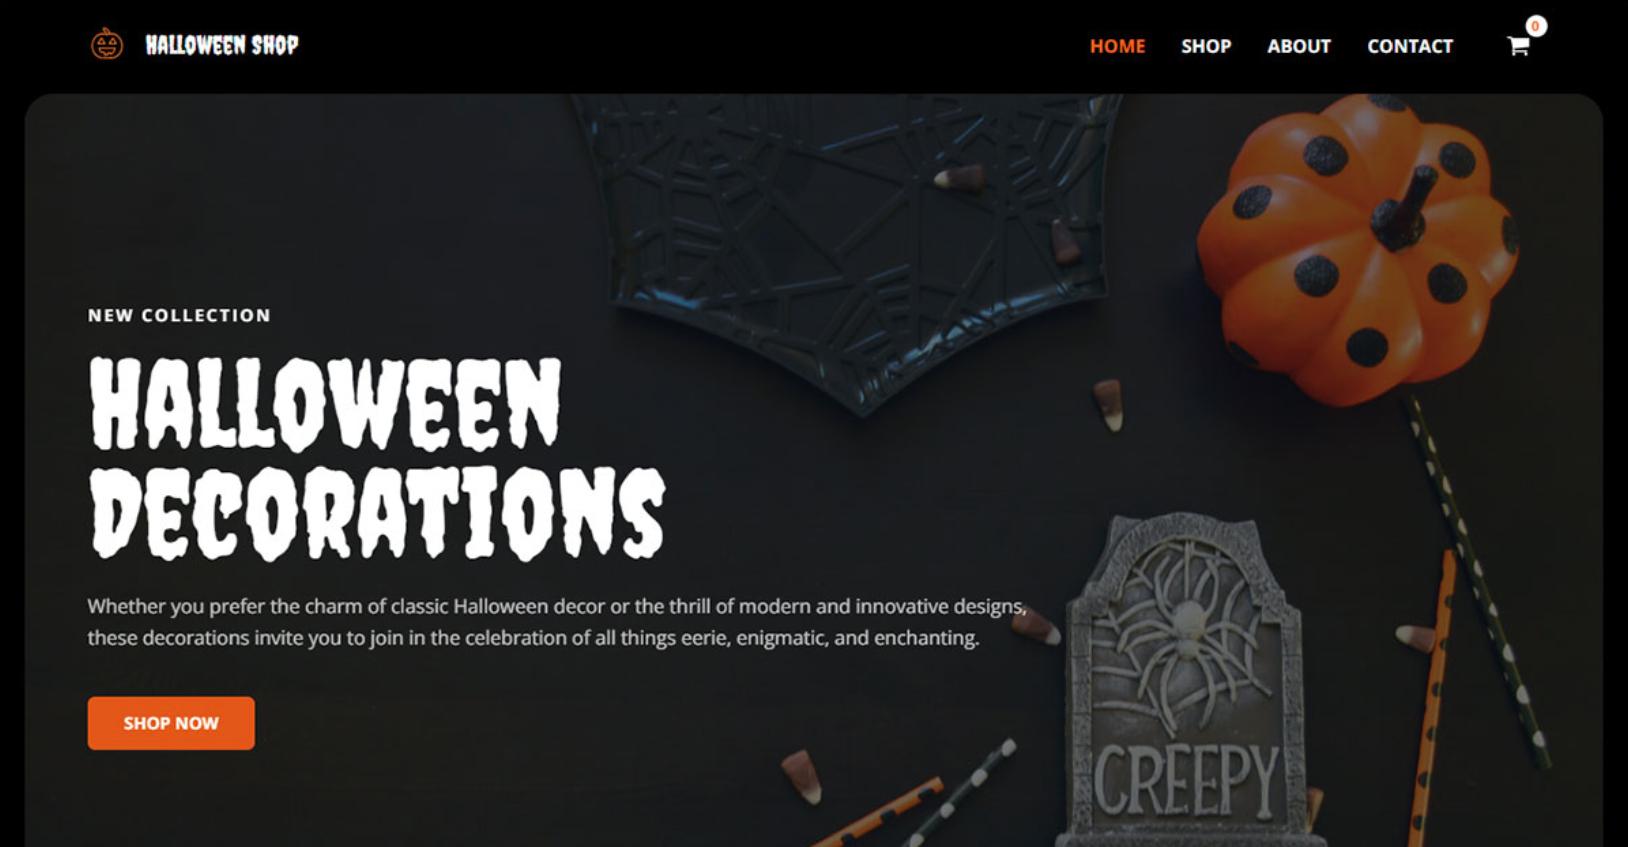 Halloween website template made with Elementor page builder